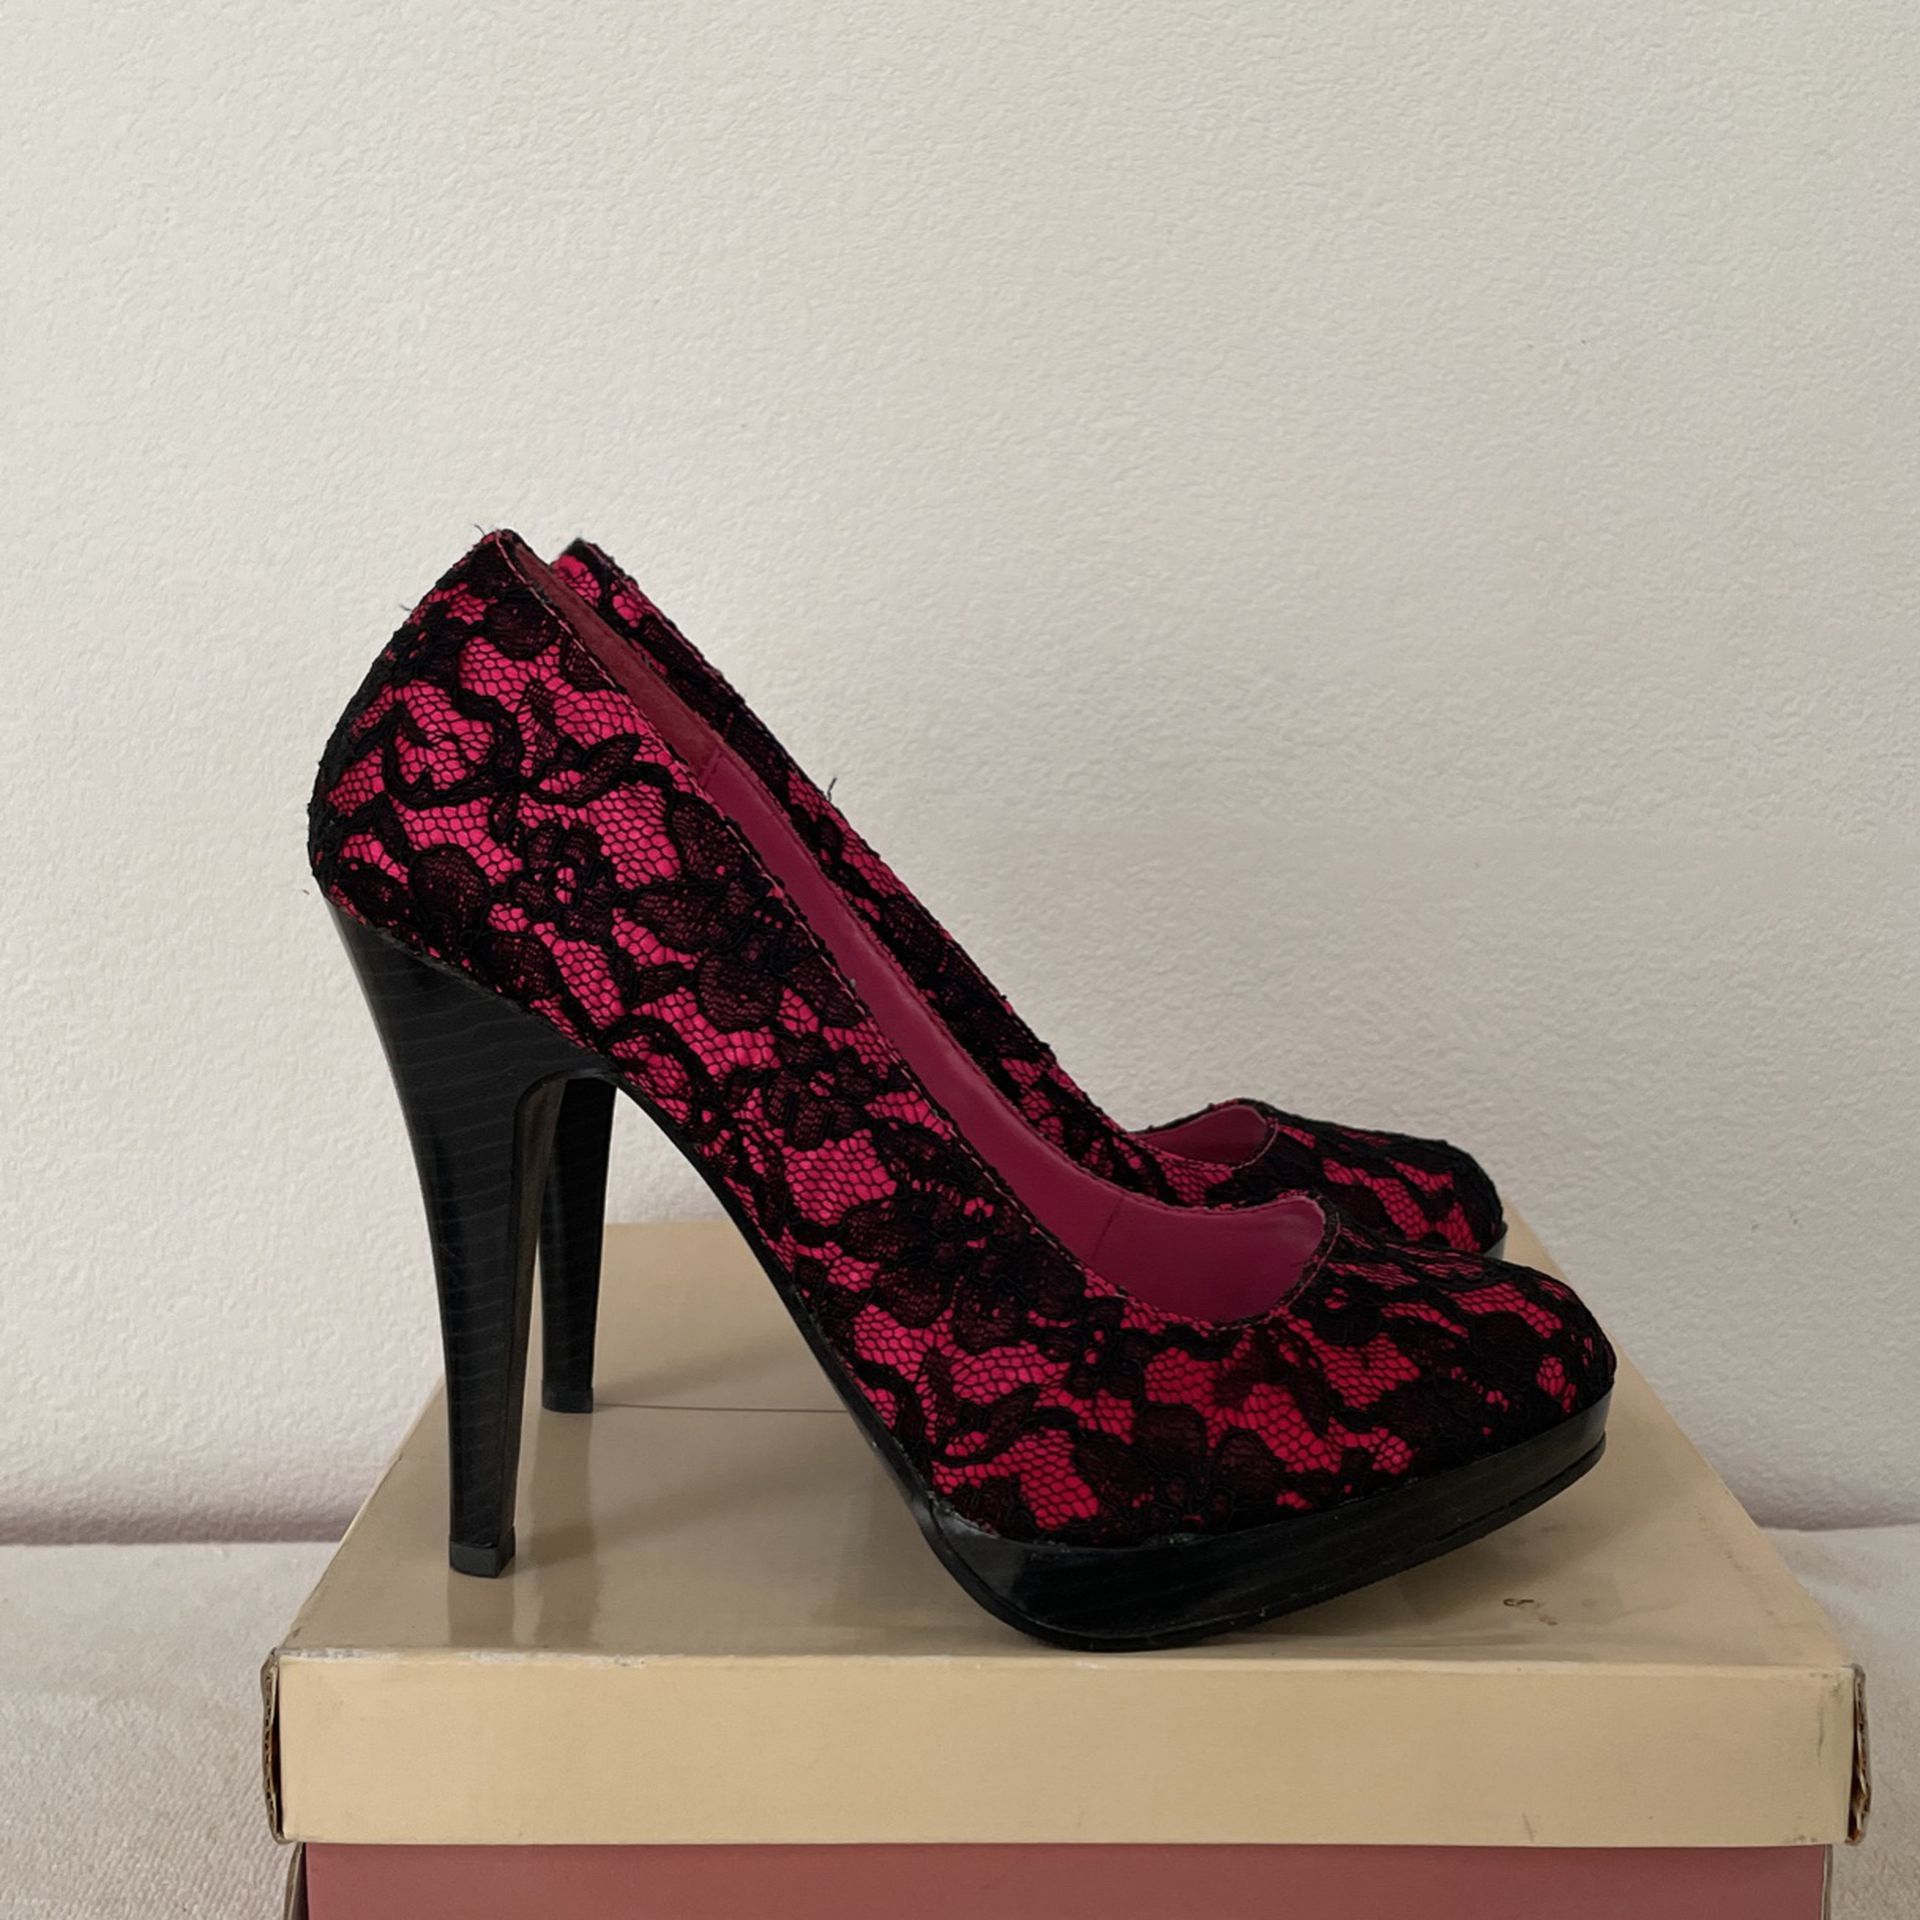 Delicious Hot Pink Fuschia Satin Lace Heels Pumps. Size: 8.5, New w/Box